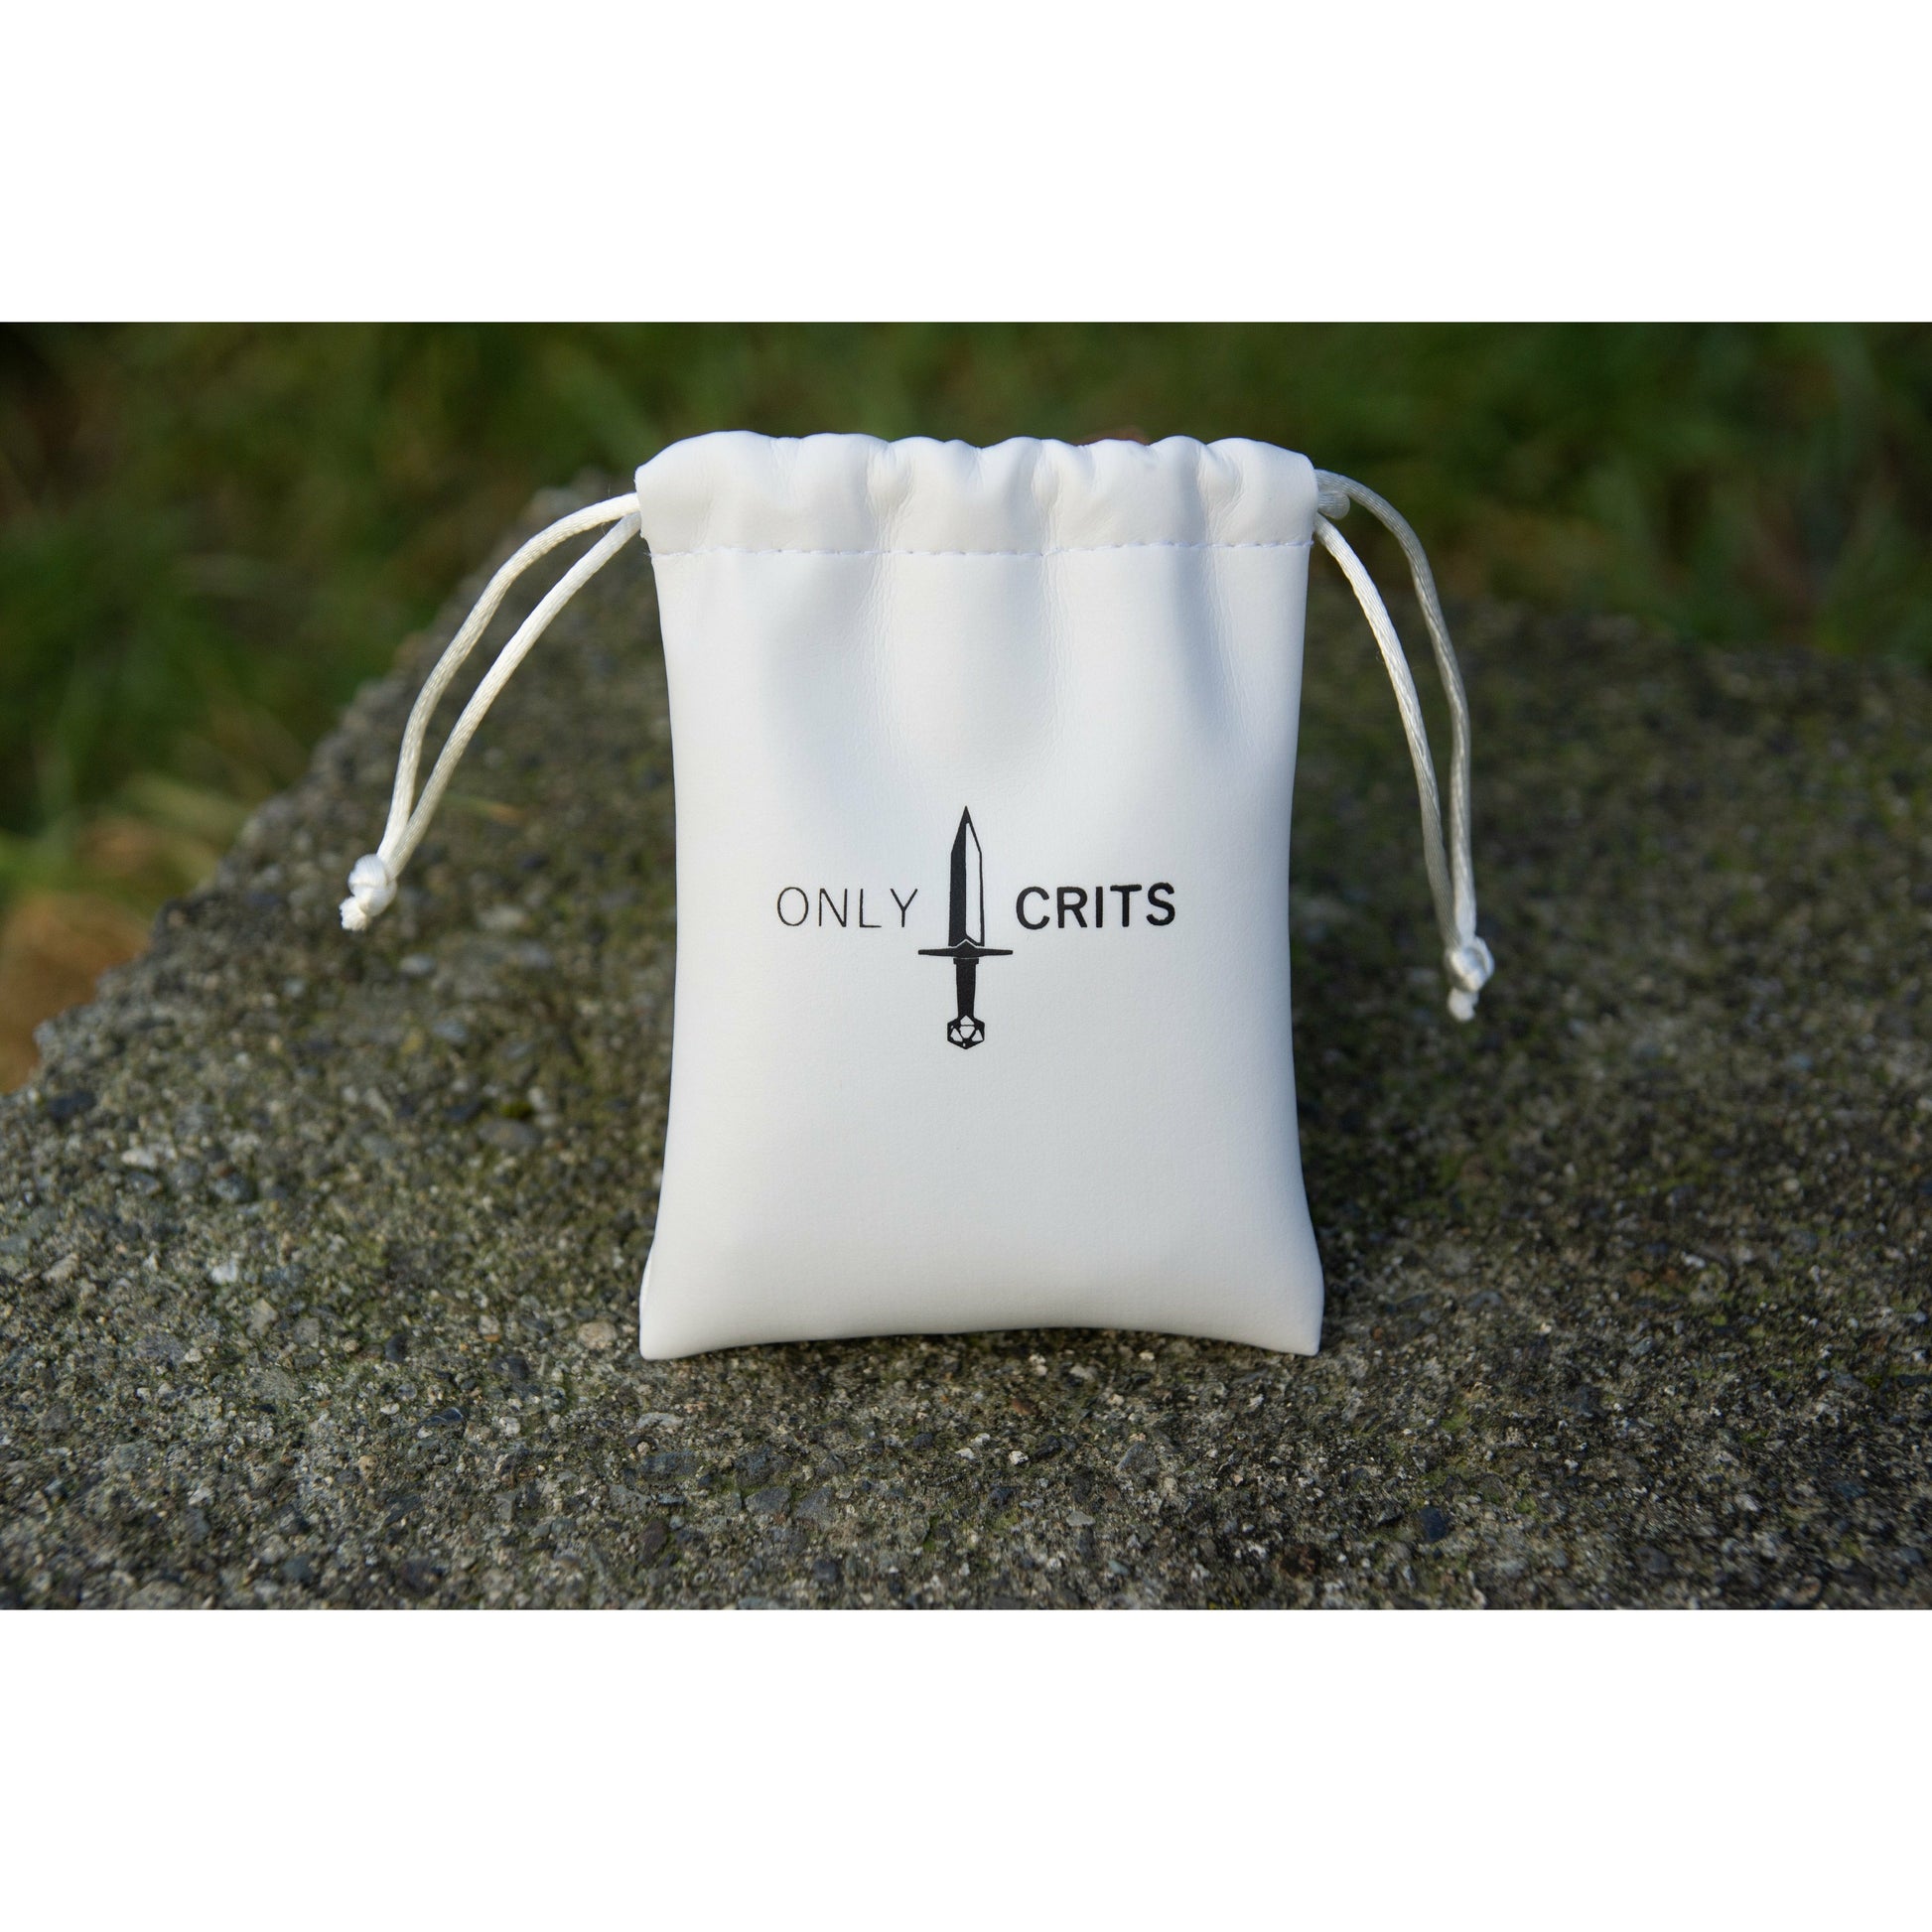 Complimentary white Only Crits dice bag